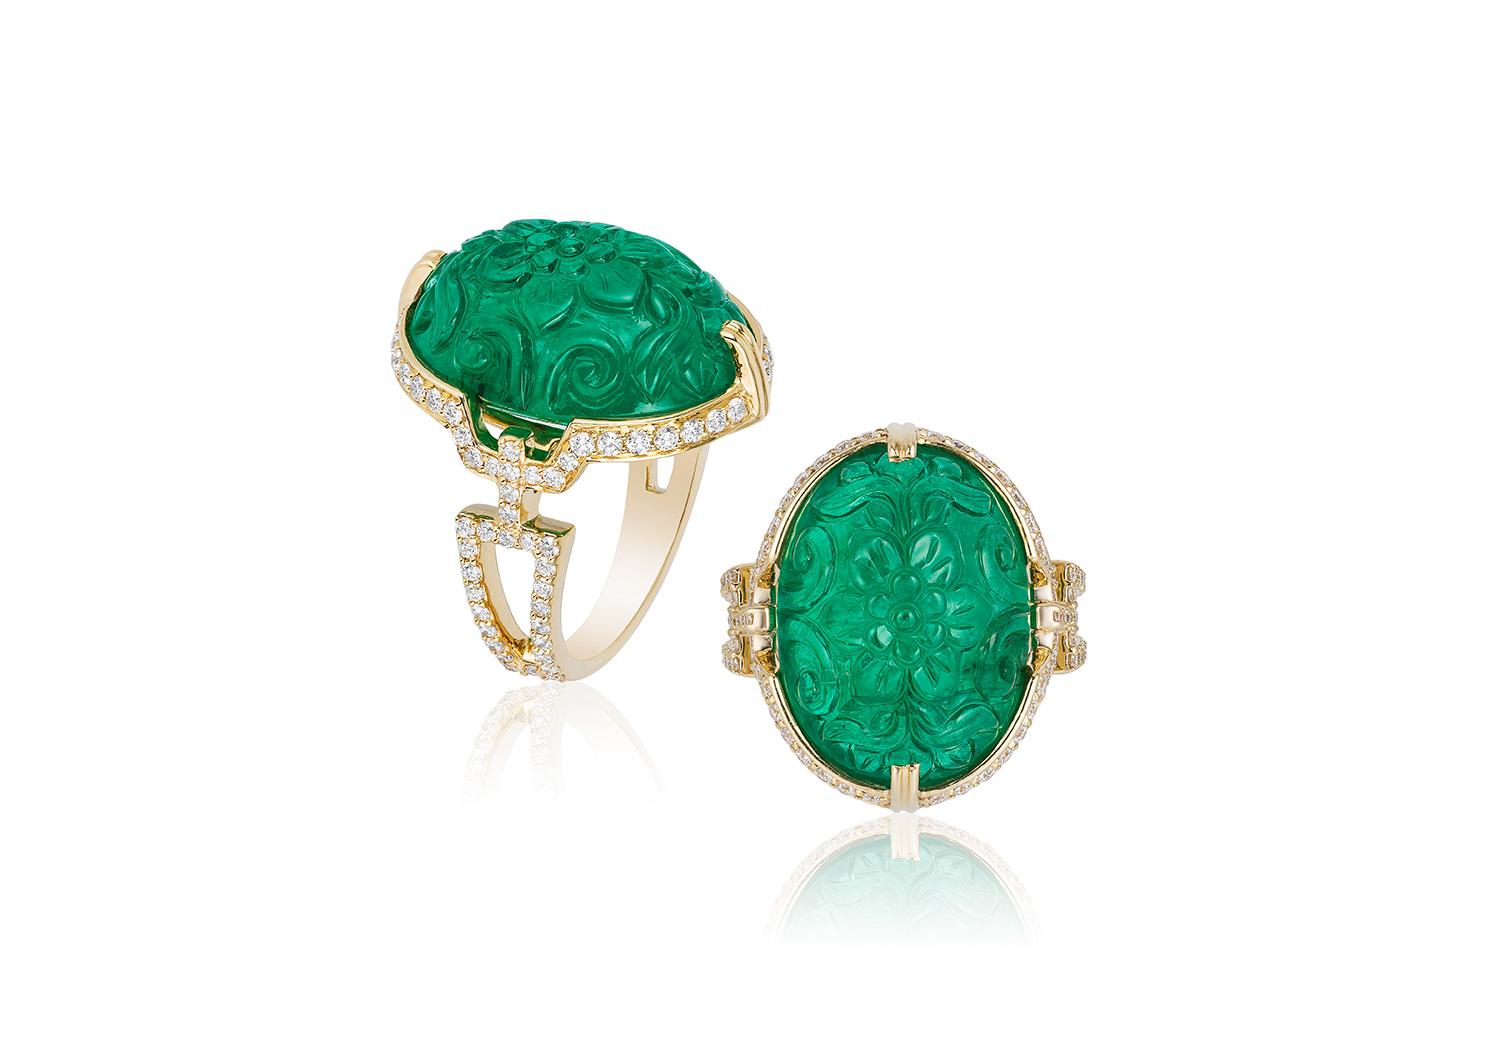 Carved Emerald Ring with Diamond in 18K Yellow Gold, from 'G-One' Collection 

Stone size: 19.5 x 14.4 mm 

Approx. gemstone Wt: 17.17 Carats 

Diamonds: G-H / VS, Approx. Wt: 0.71 Carats